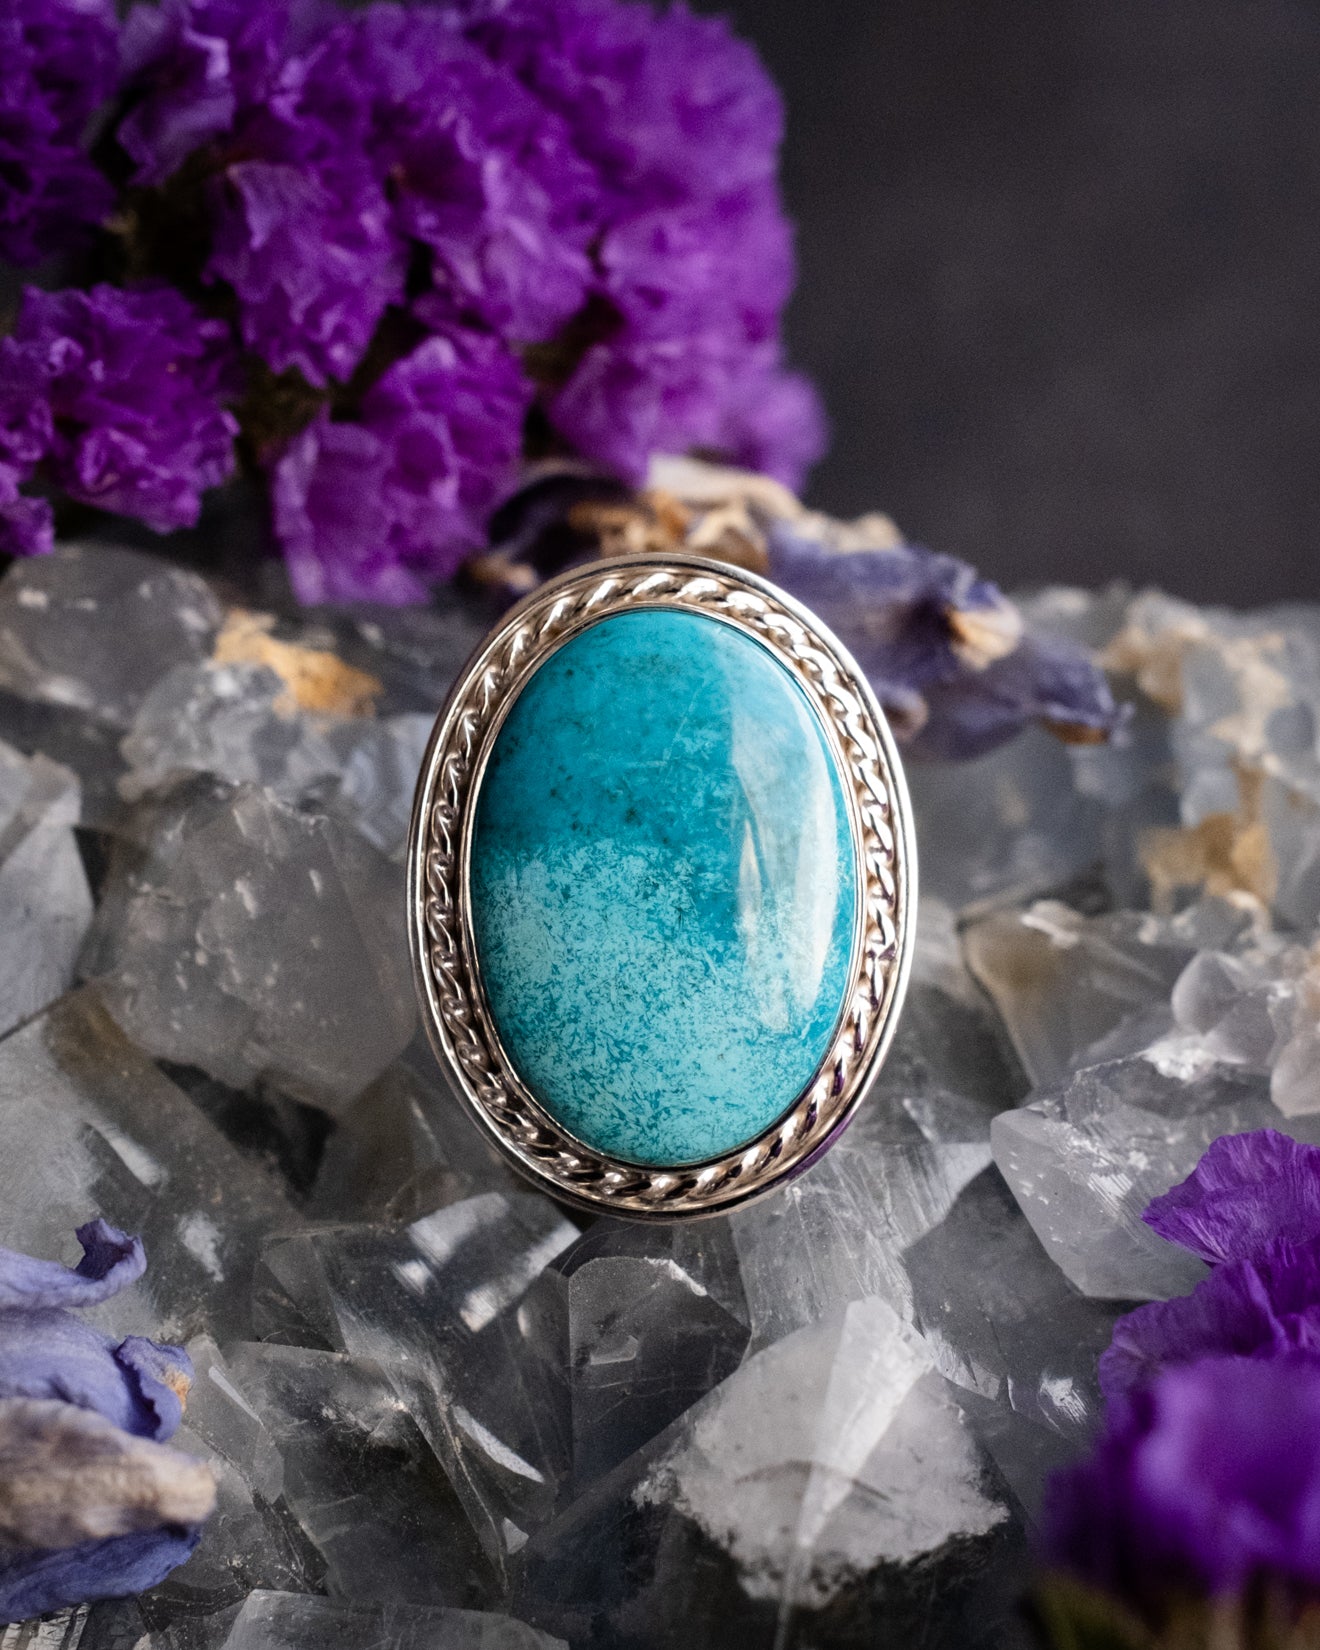 Namibian Chrysocolla Ring in Sterling Silver - Size 5 US / J 1/2 UK - The Healing Pear